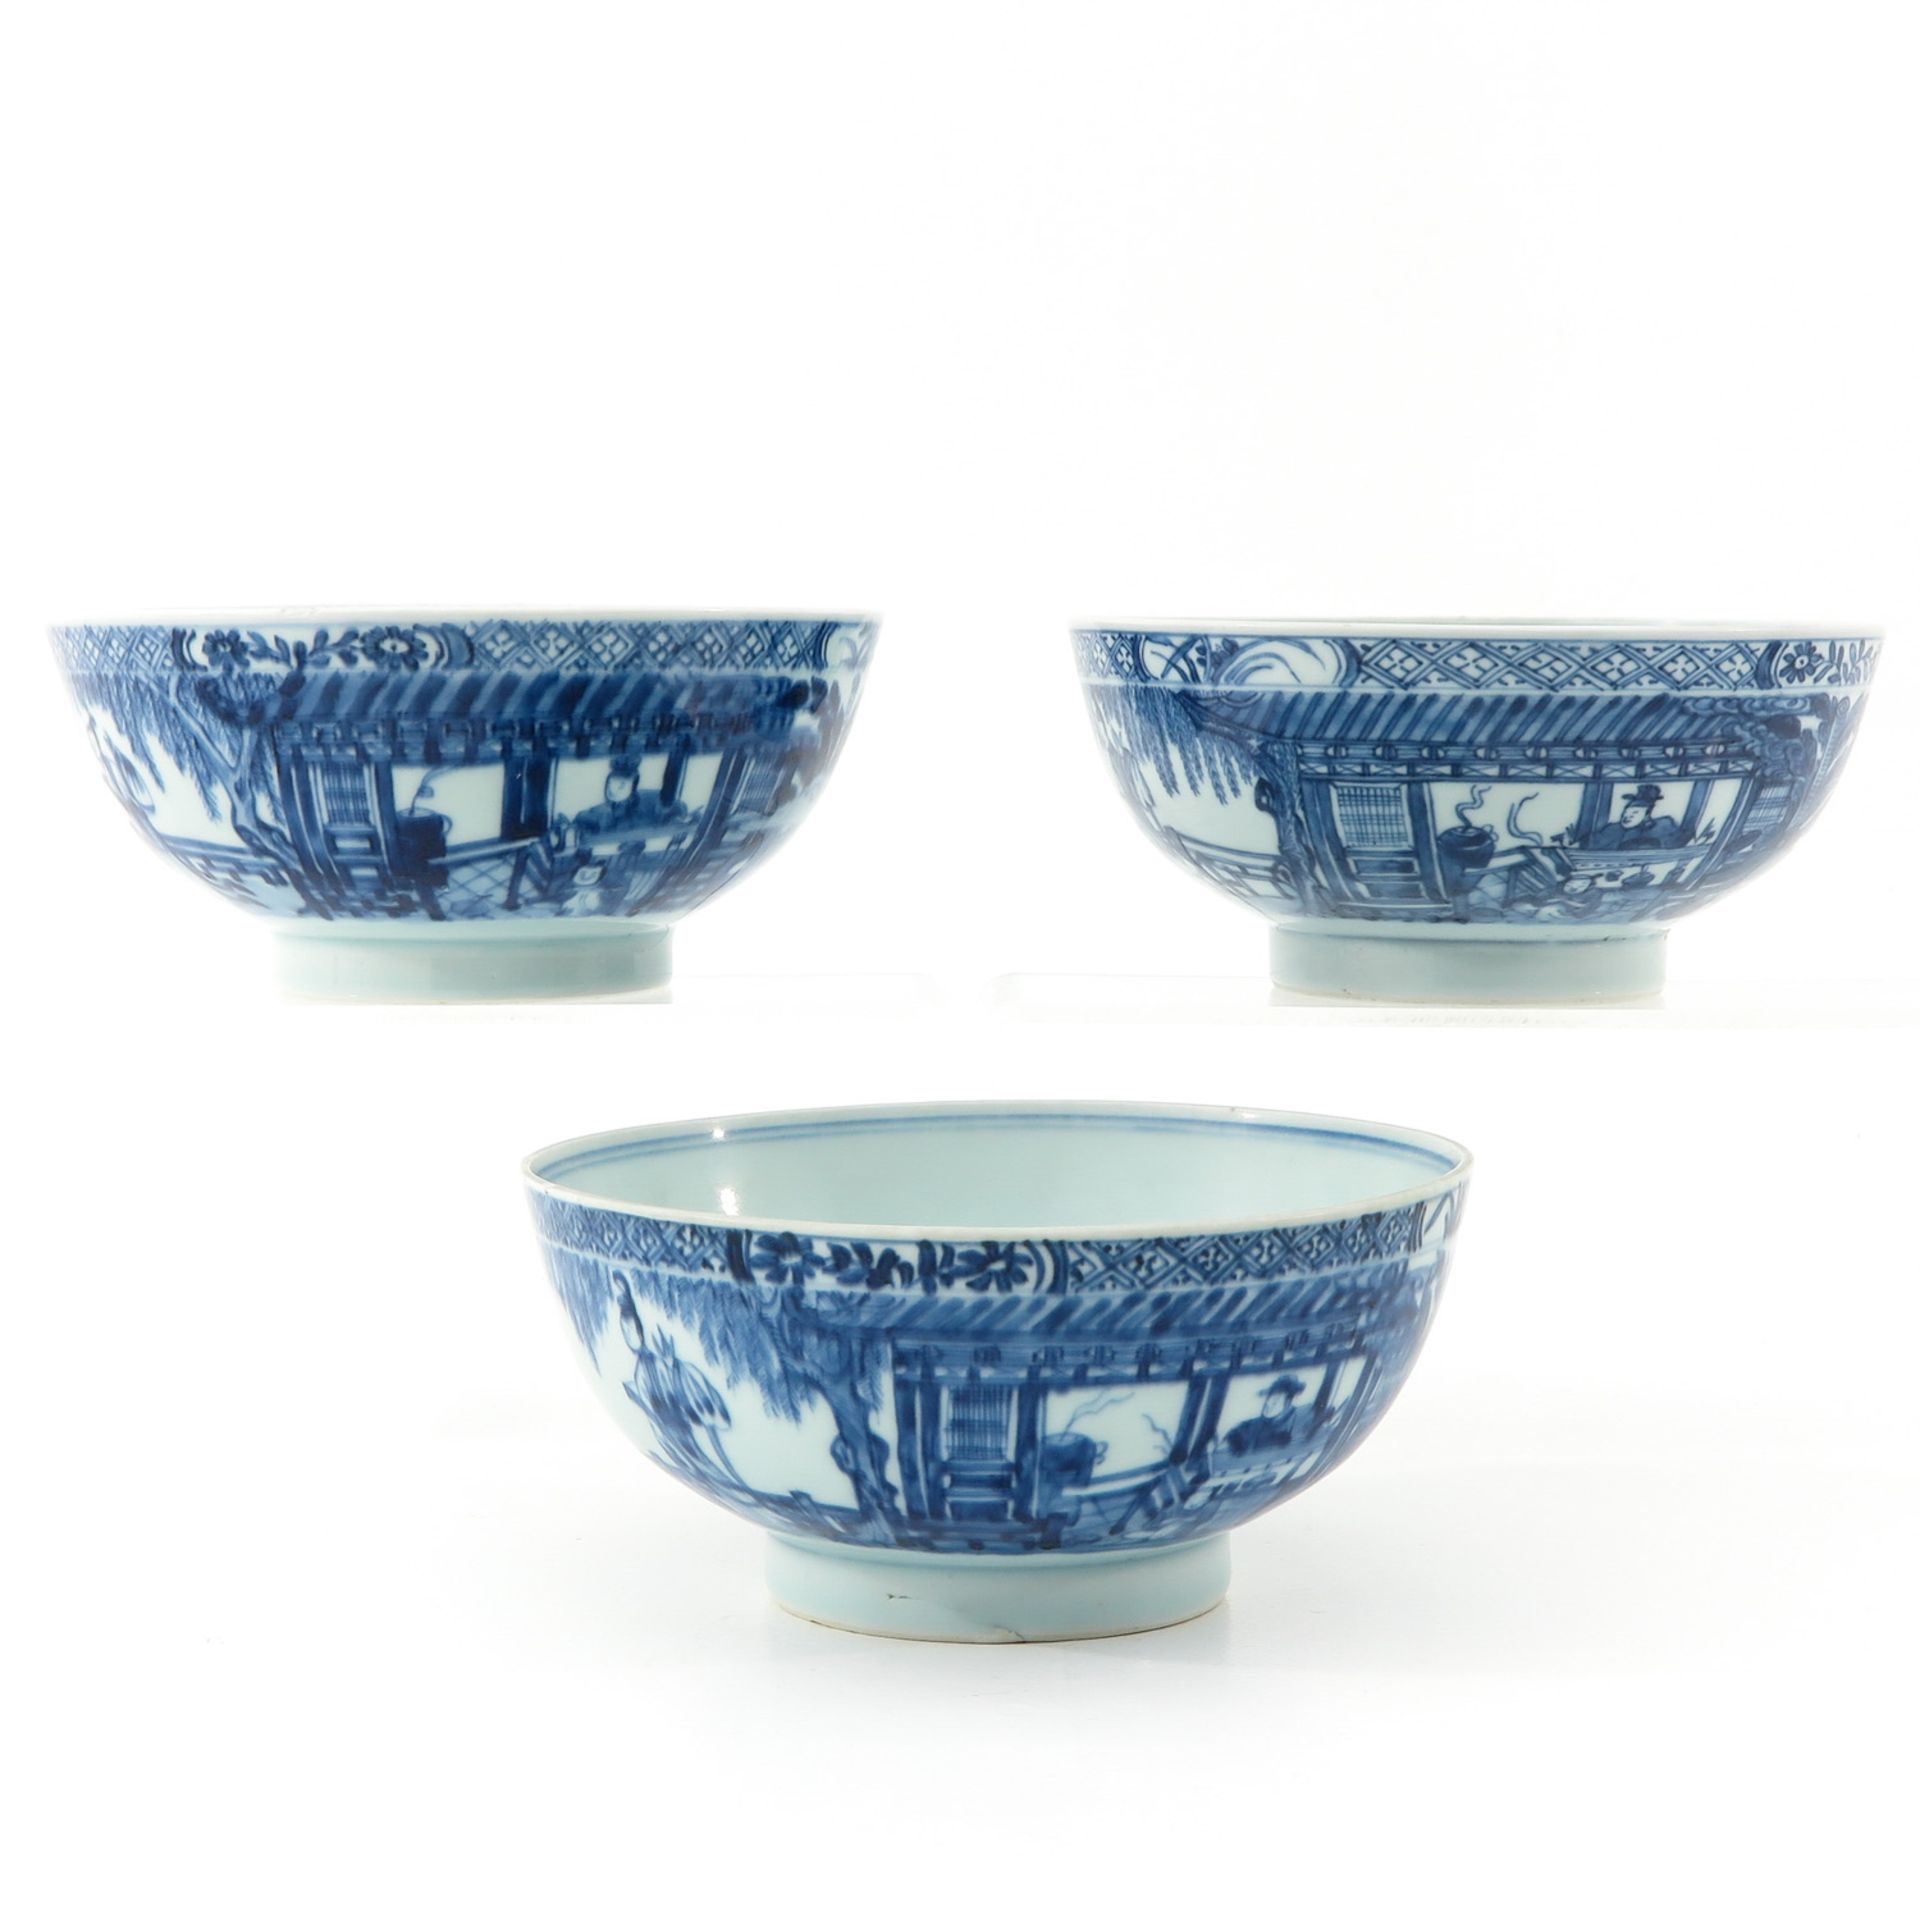 A Series of 3 Blue and White Bowls - Image 2 of 10